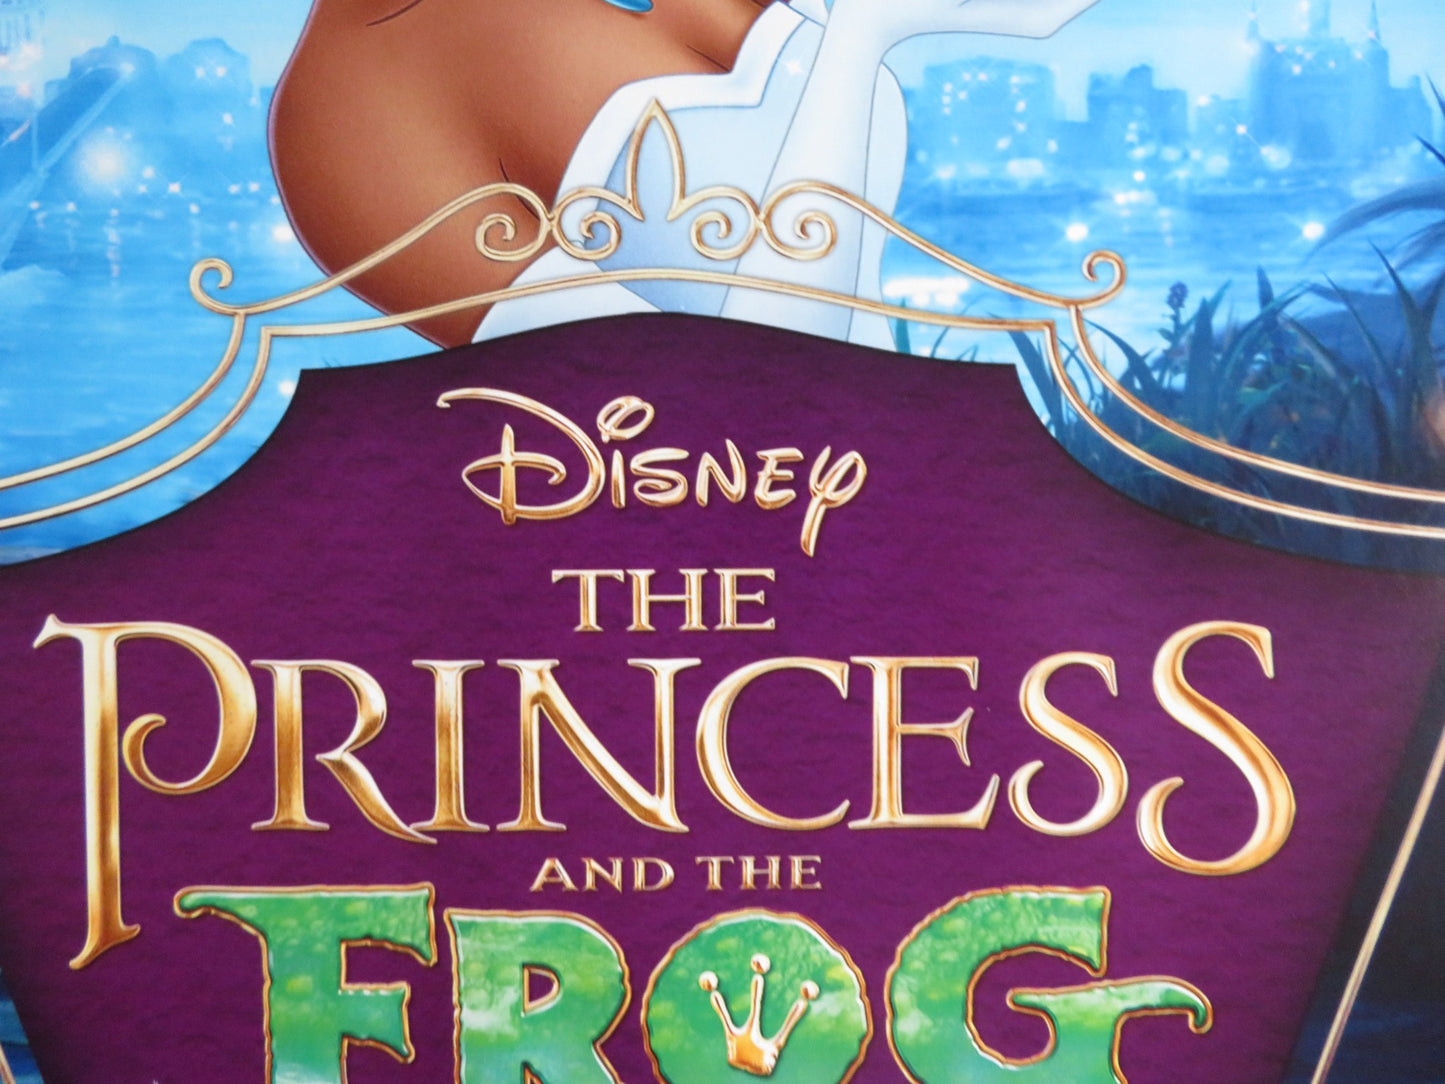 THE PRINCESS AND THE FROG UK QUAD (30"x 40") ROLLED POSTER DISNEY 2009